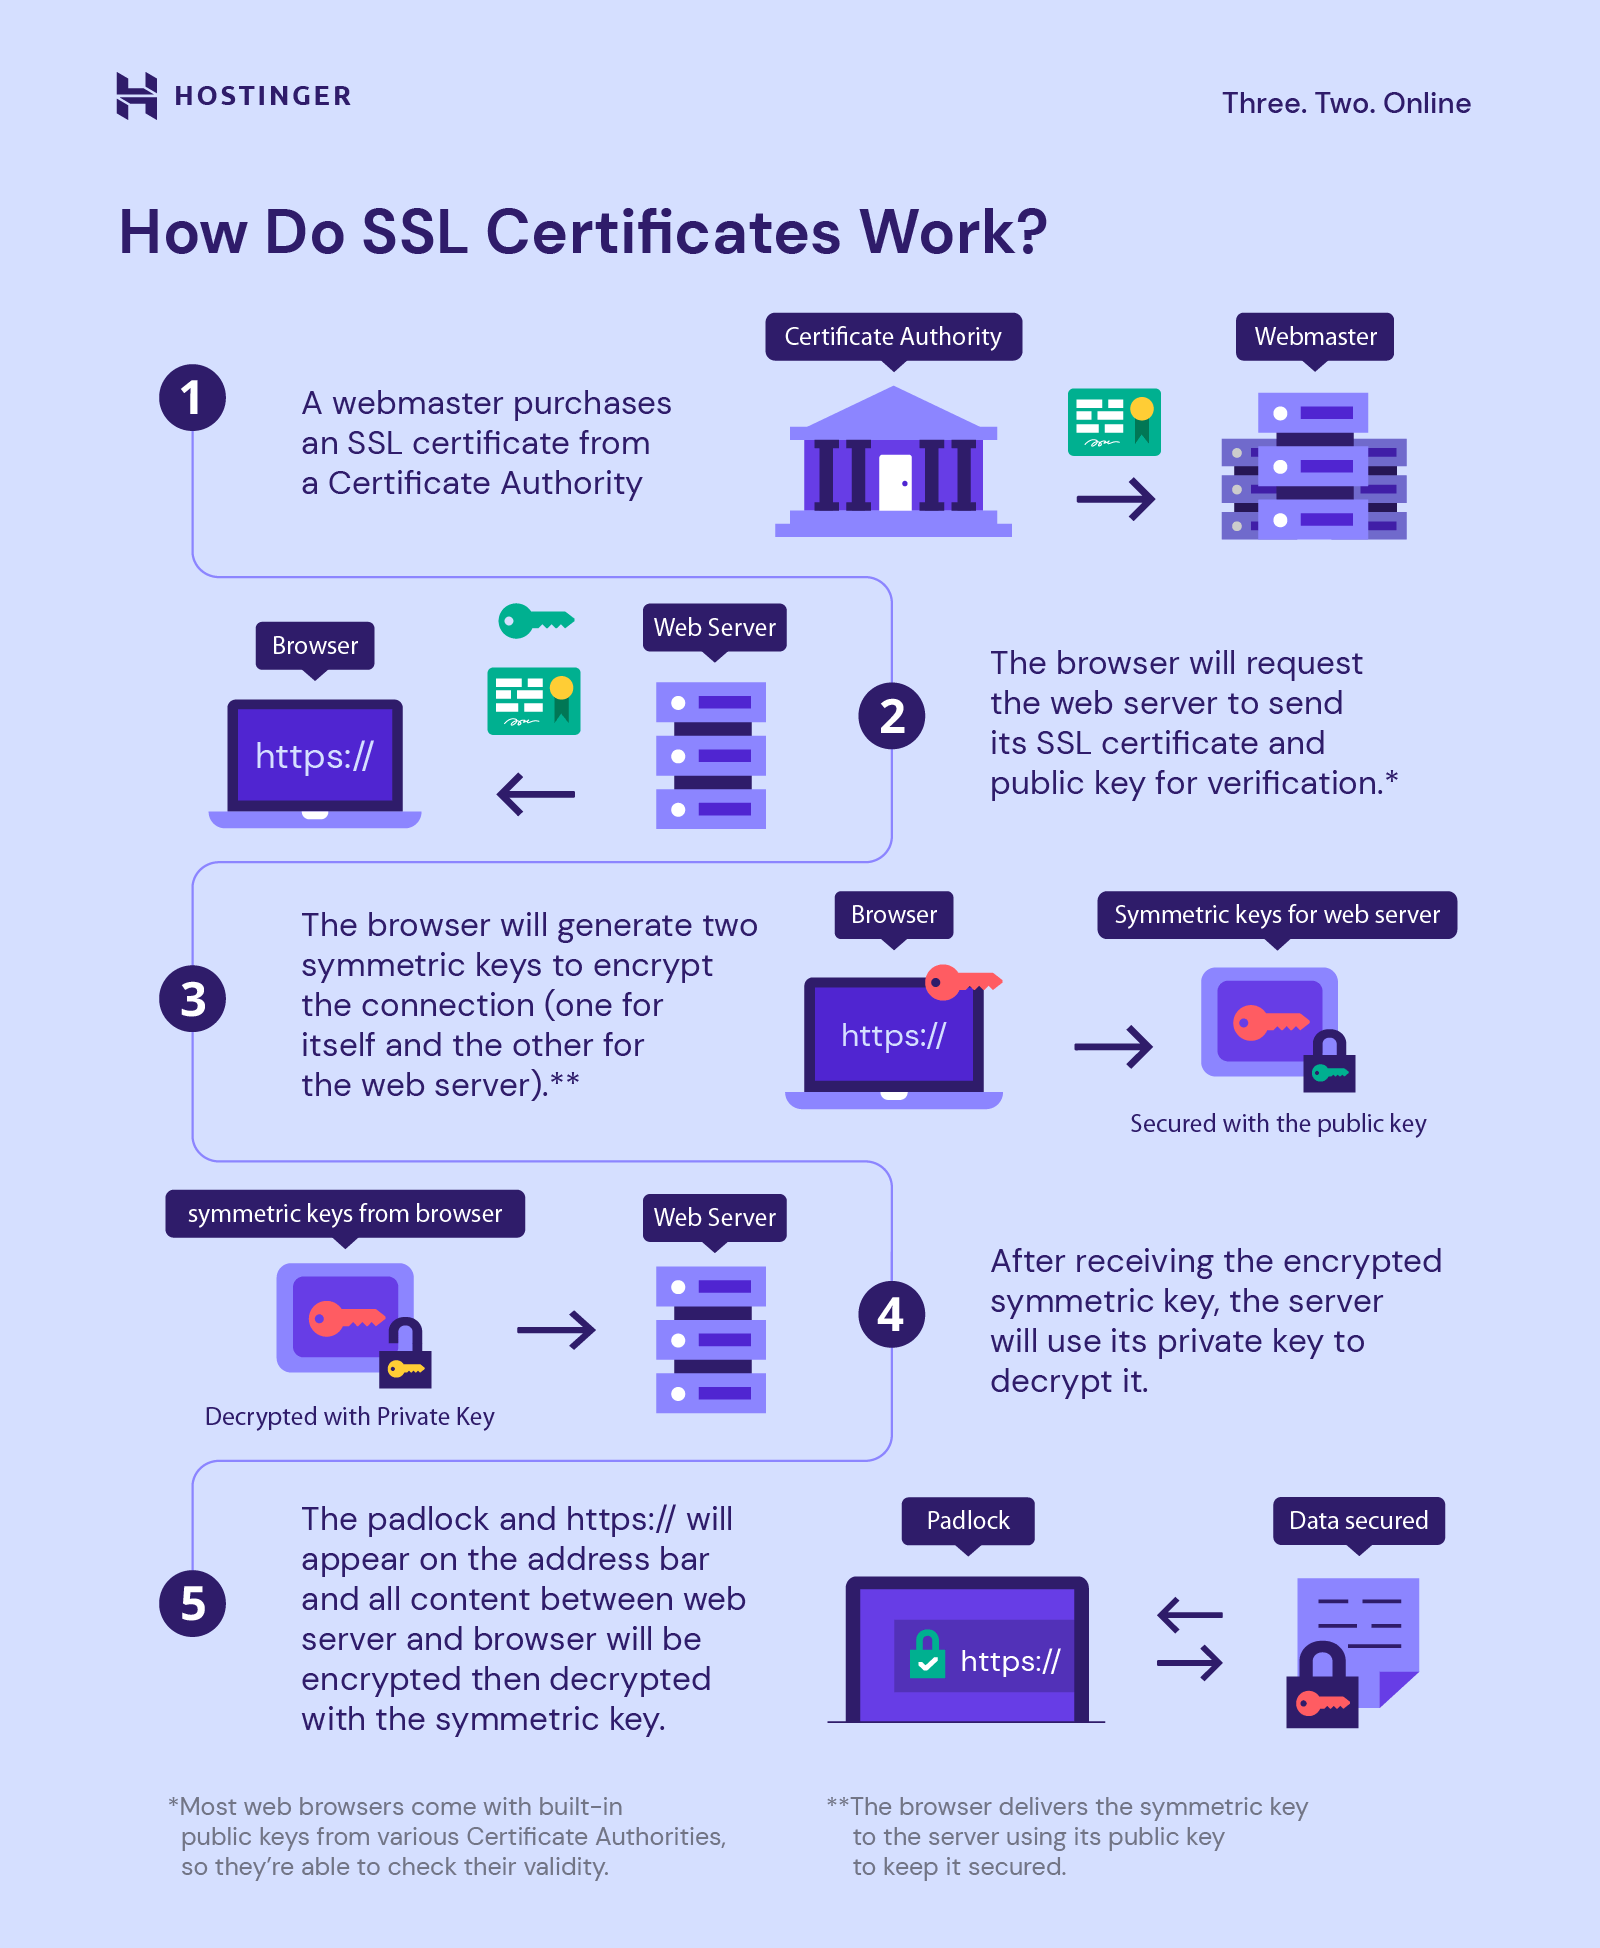 What makes an SSL certificate valid?